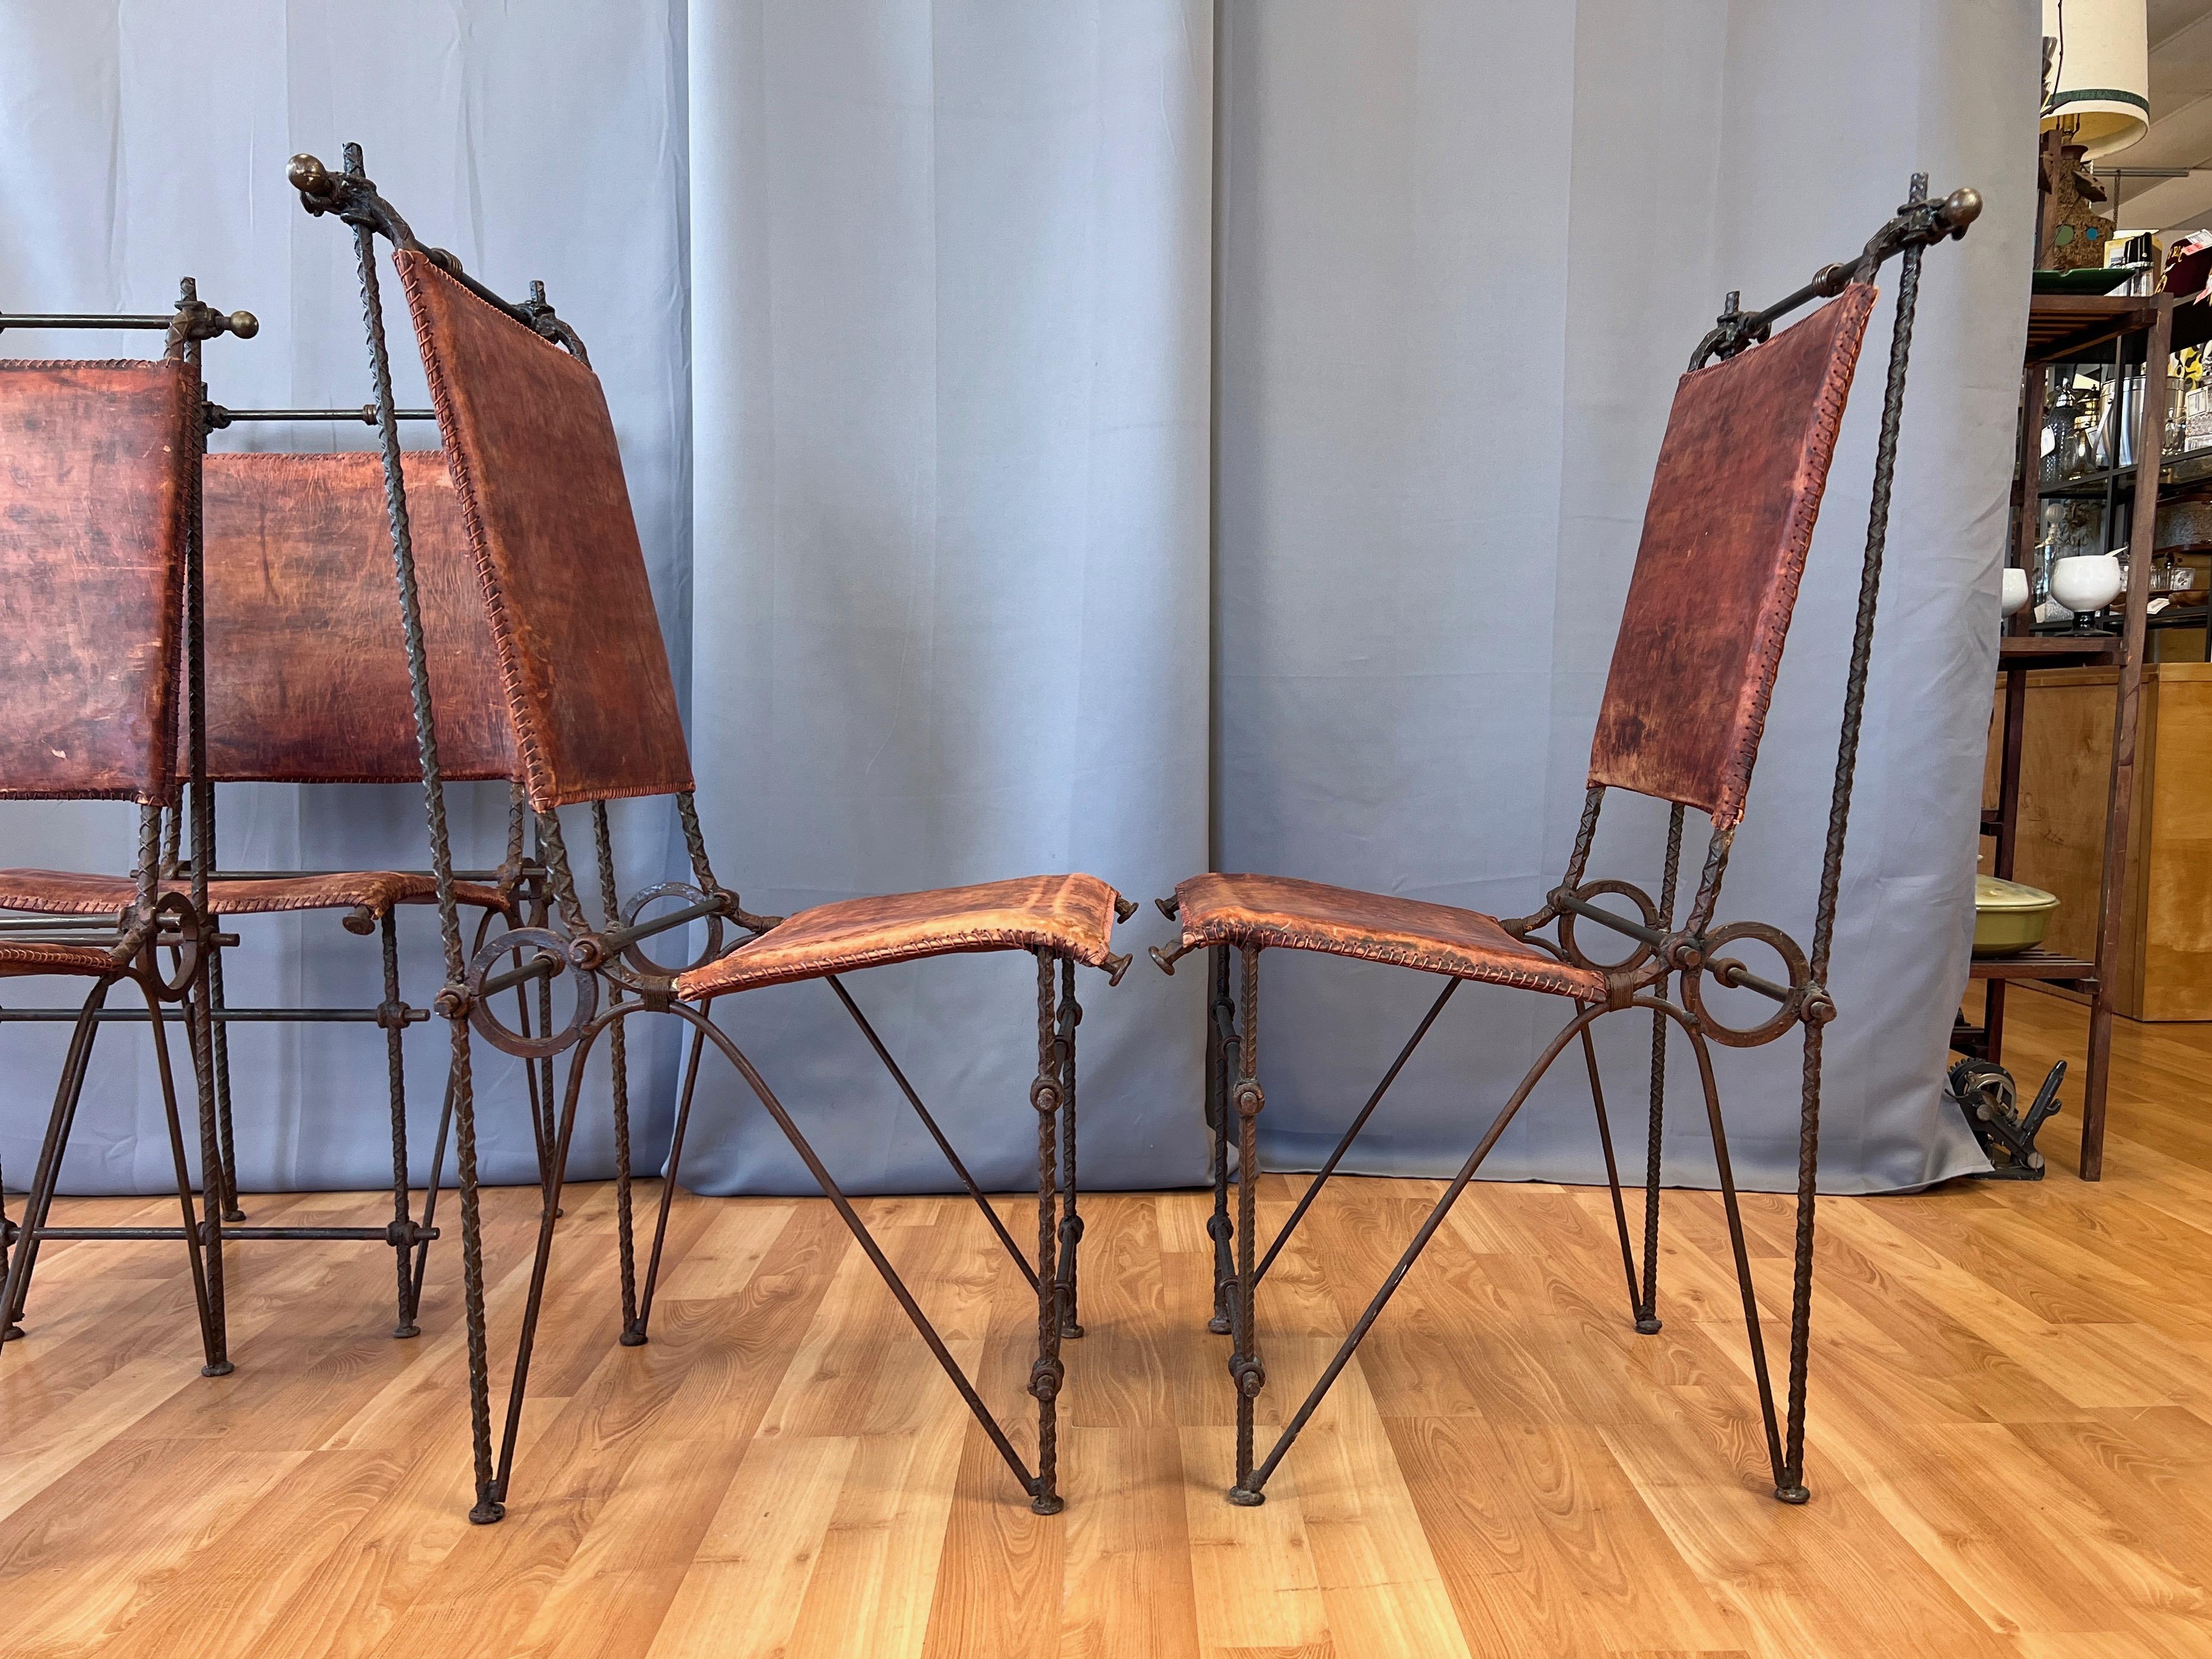 Set of 4 Ilana Goor-Attributed Brutalist Metal and Leather Dining Chairs, 1980 For Sale 5